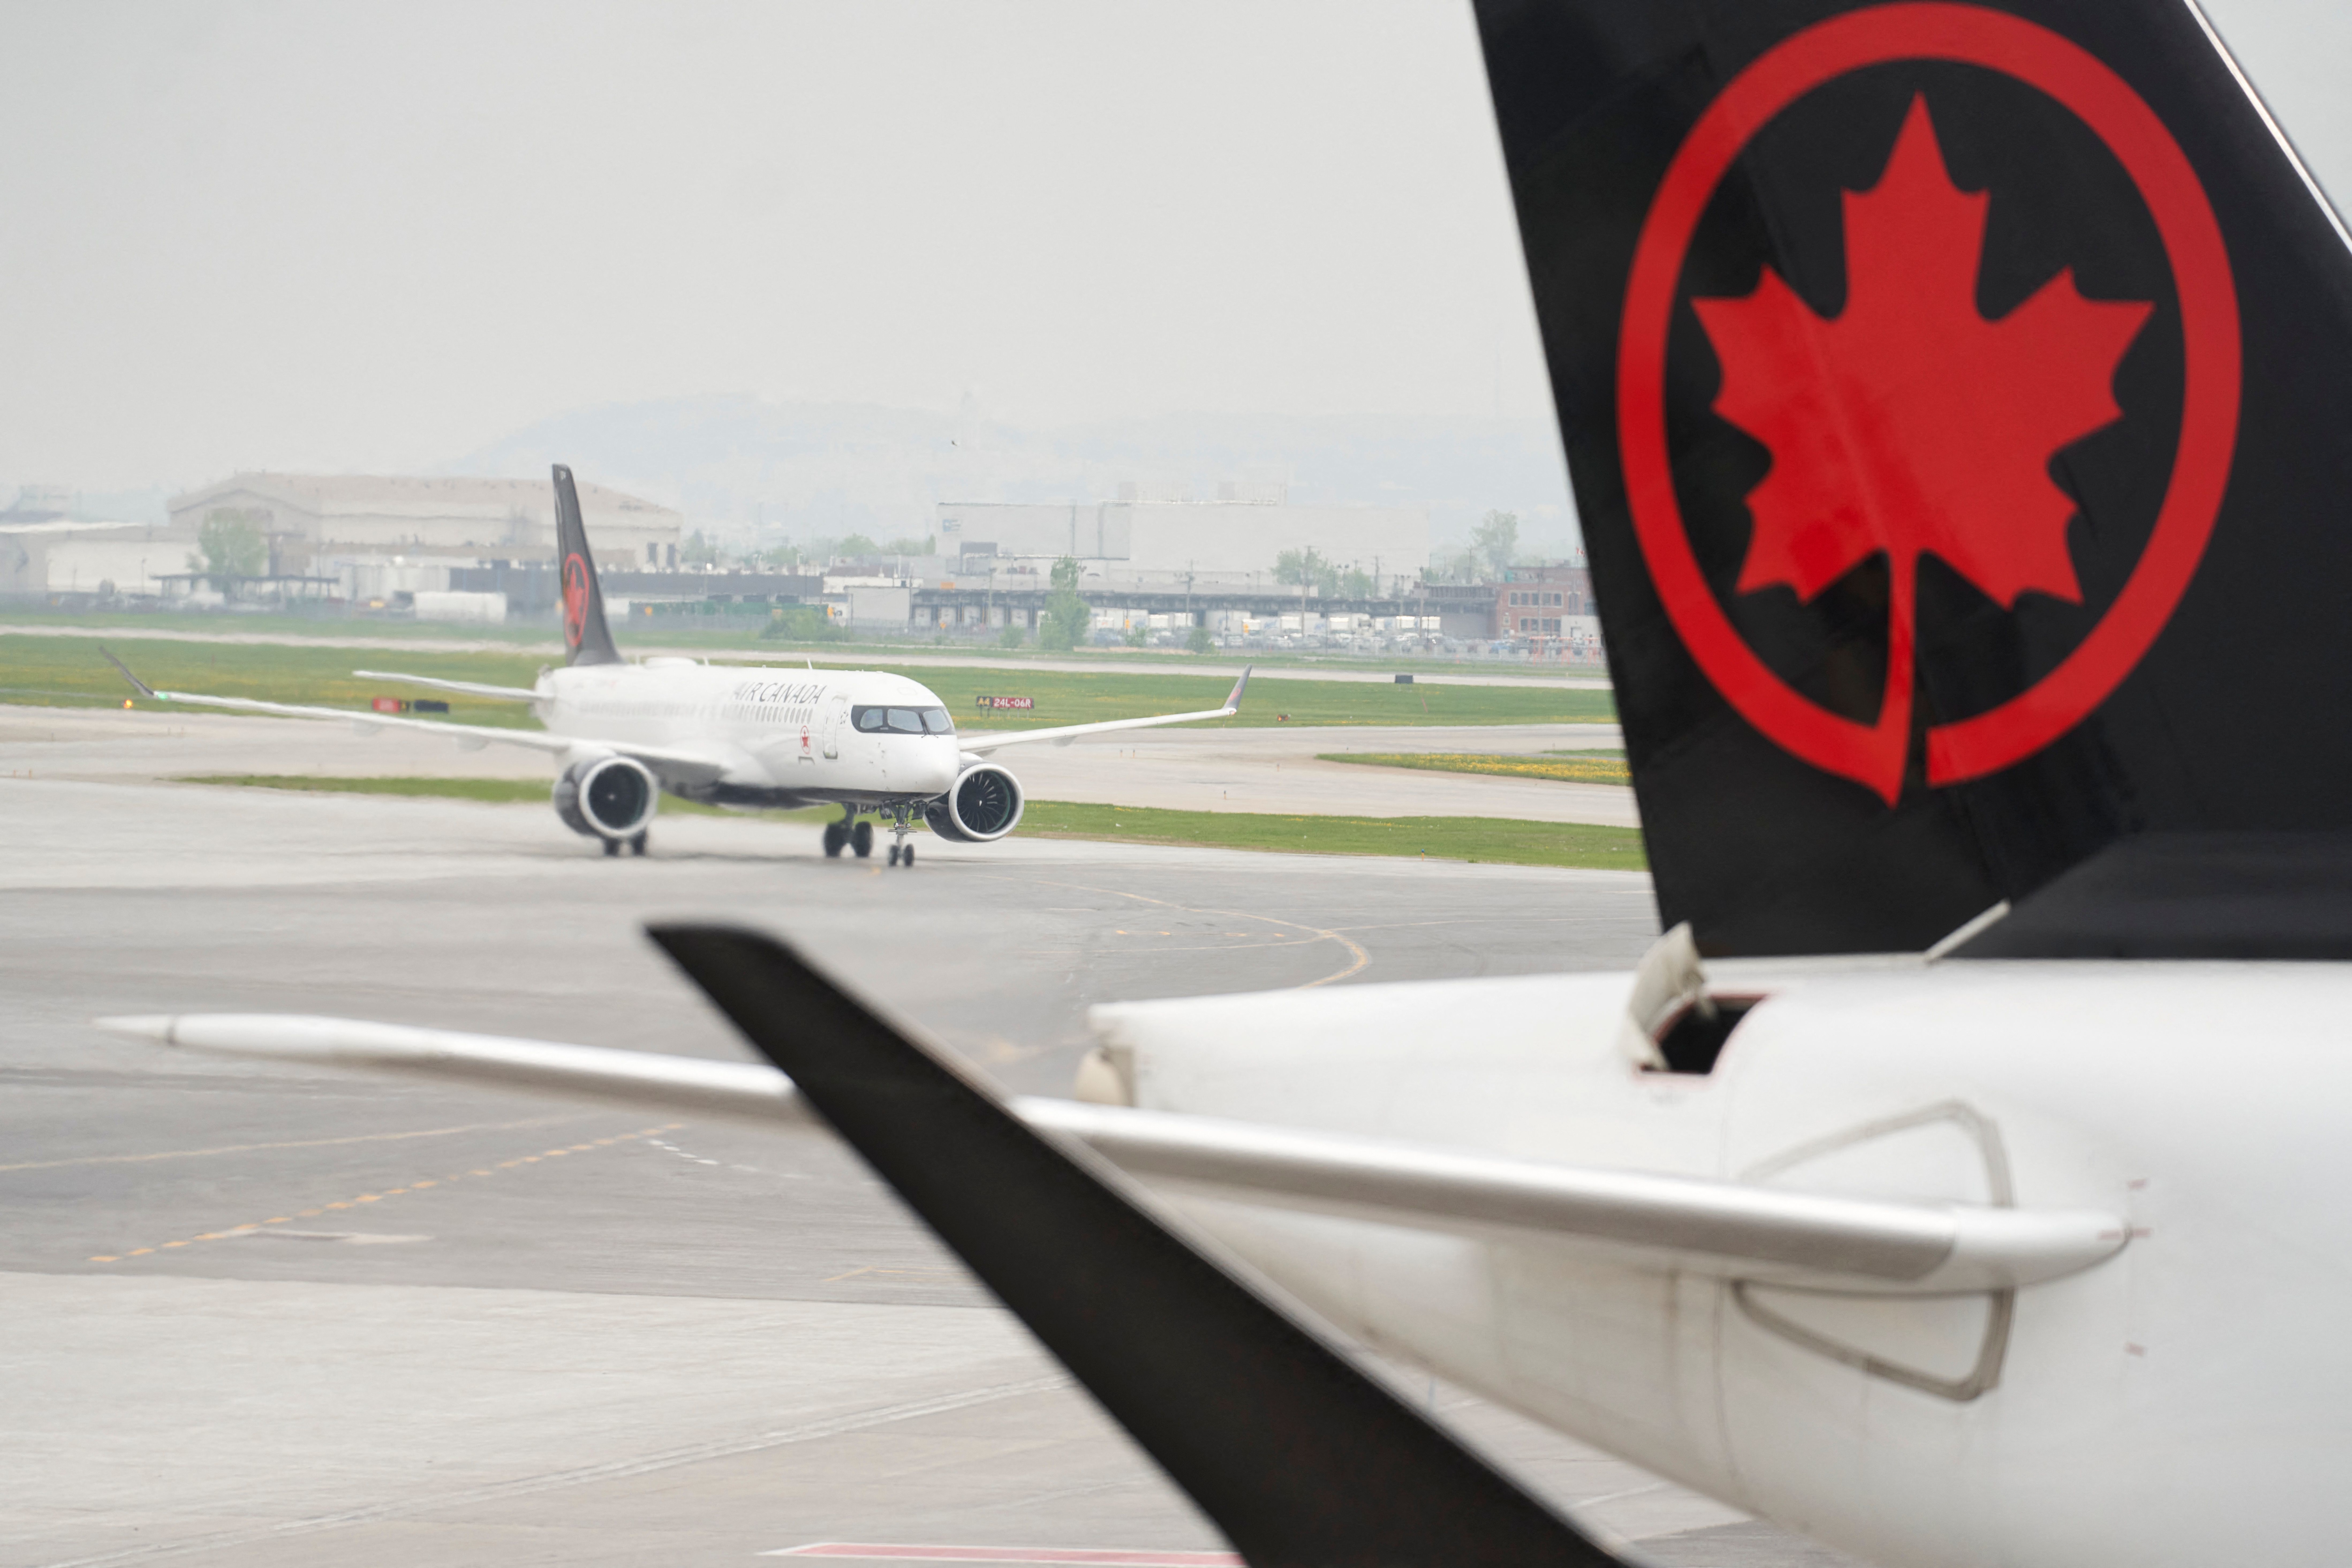 Passenger forced to drag himself off Air Canada flight after